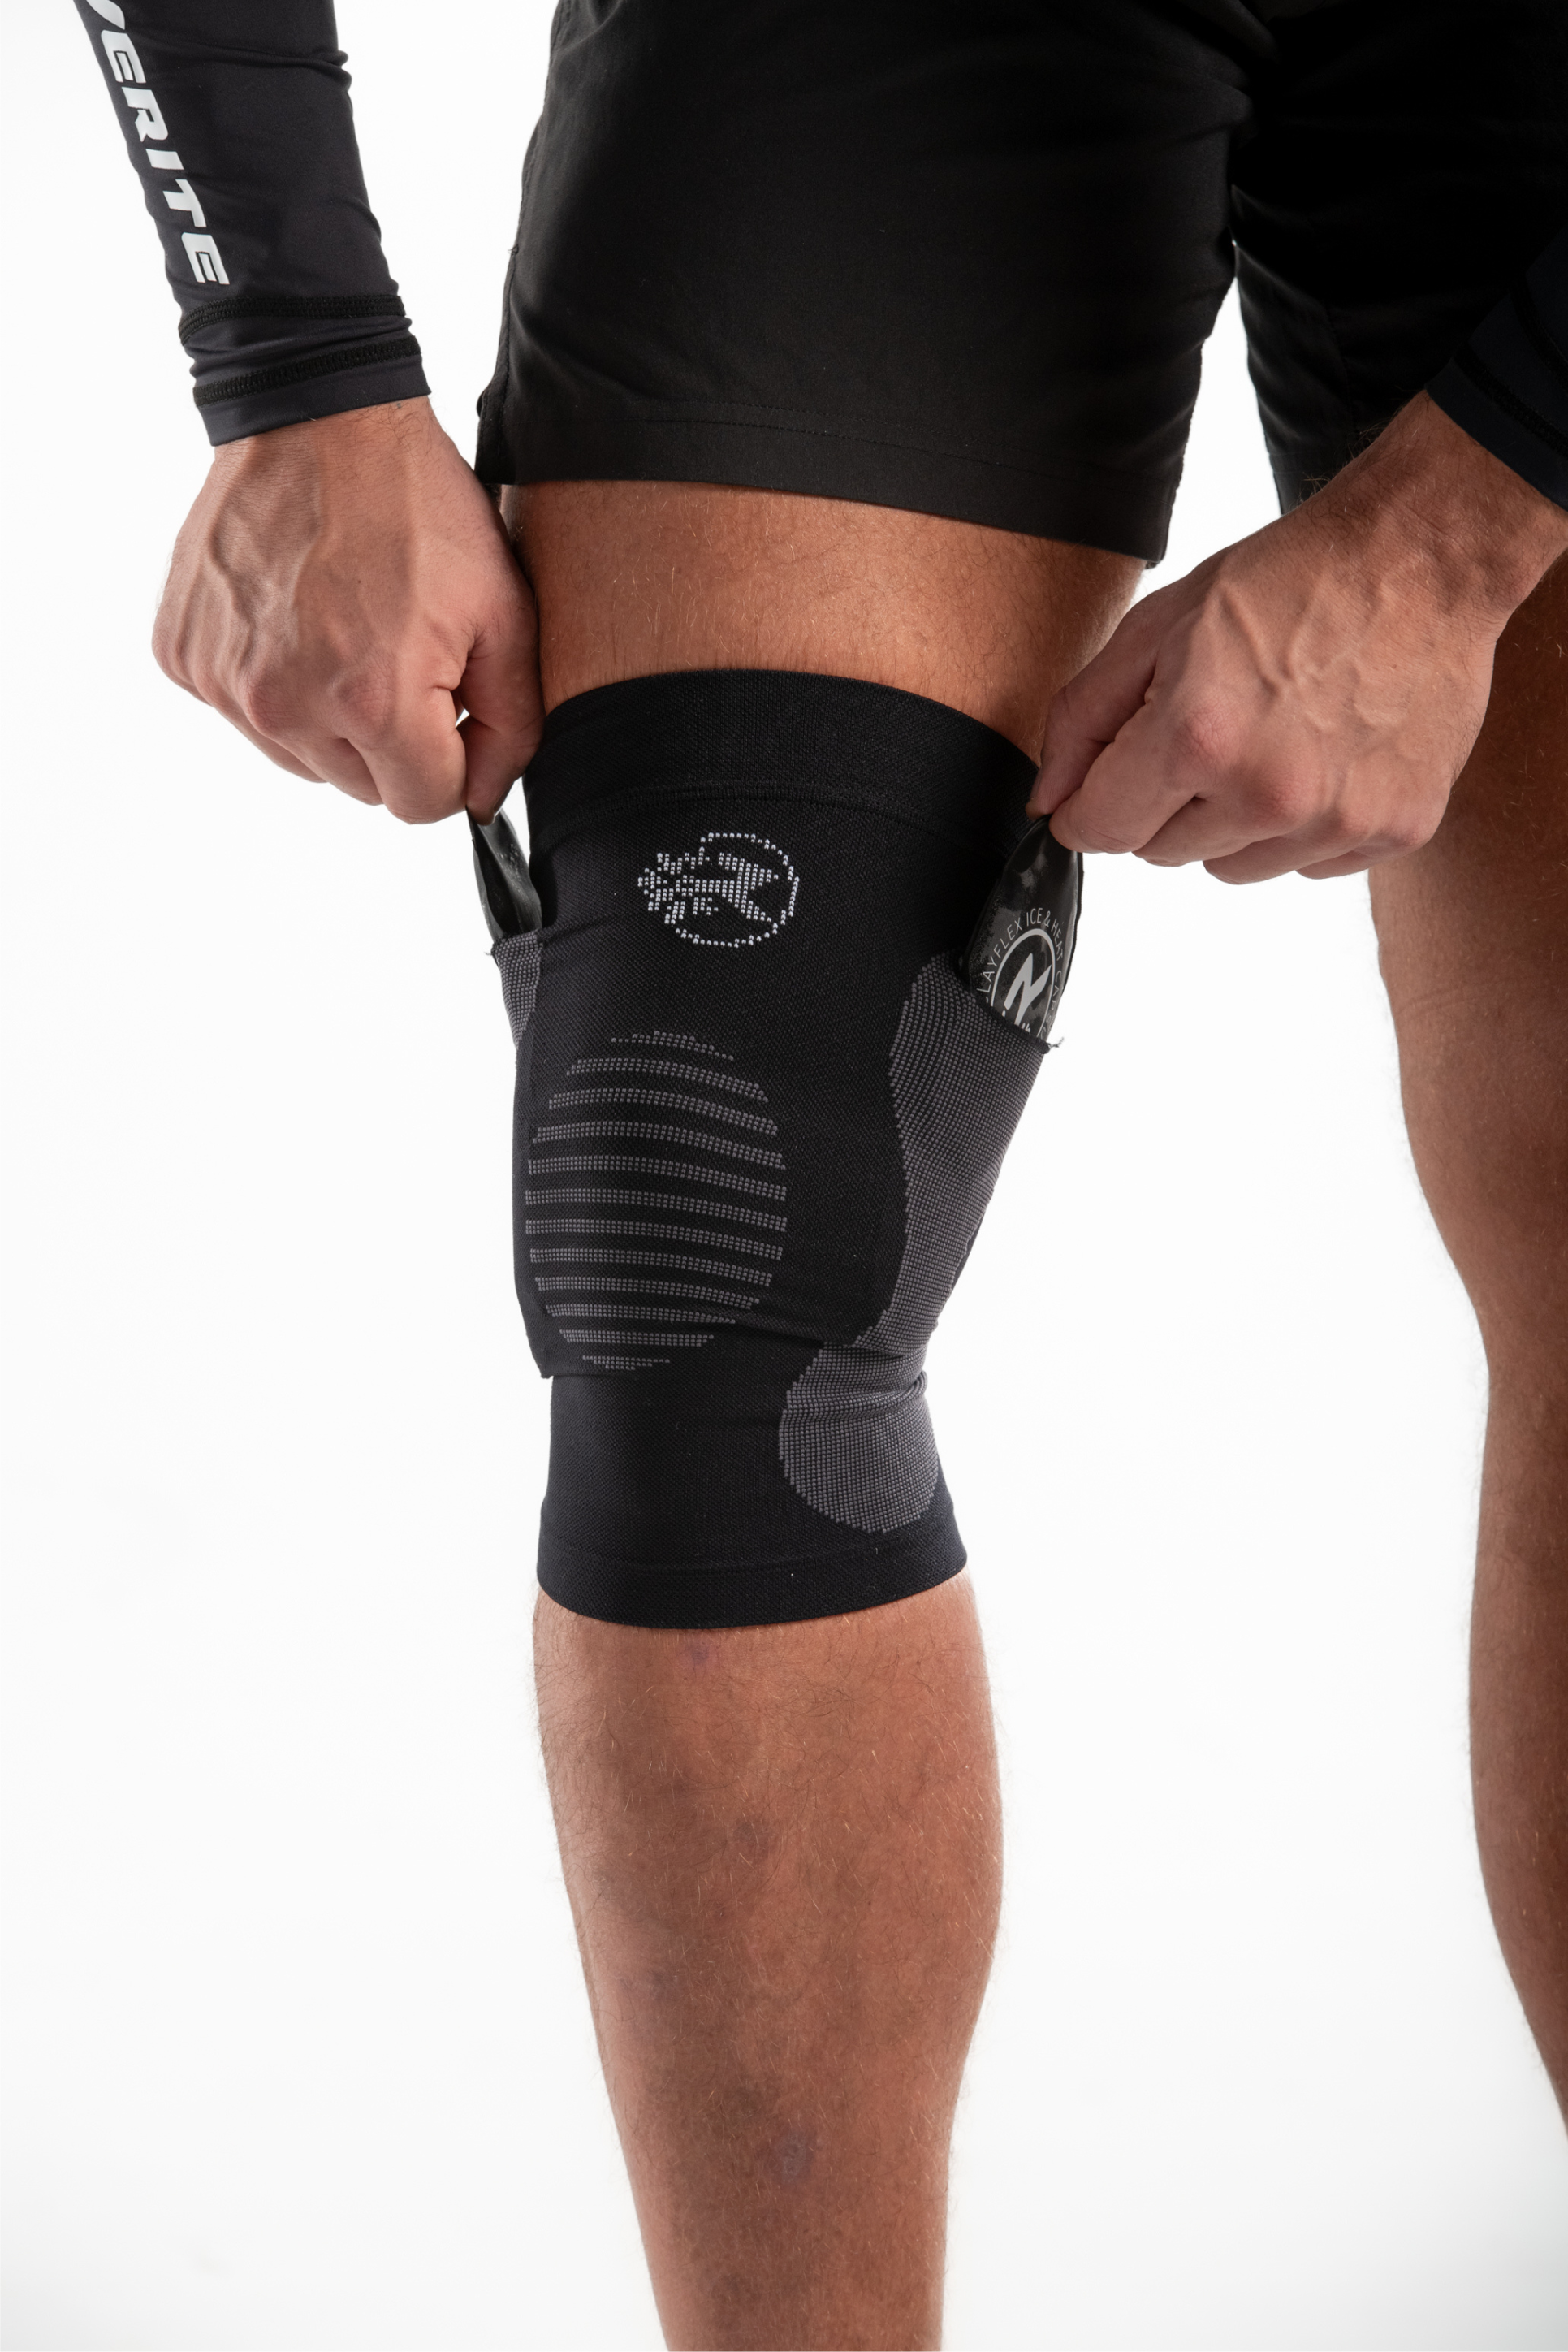 Compression Socks with Ice/Heat Packs by Recoverite Compression Wear